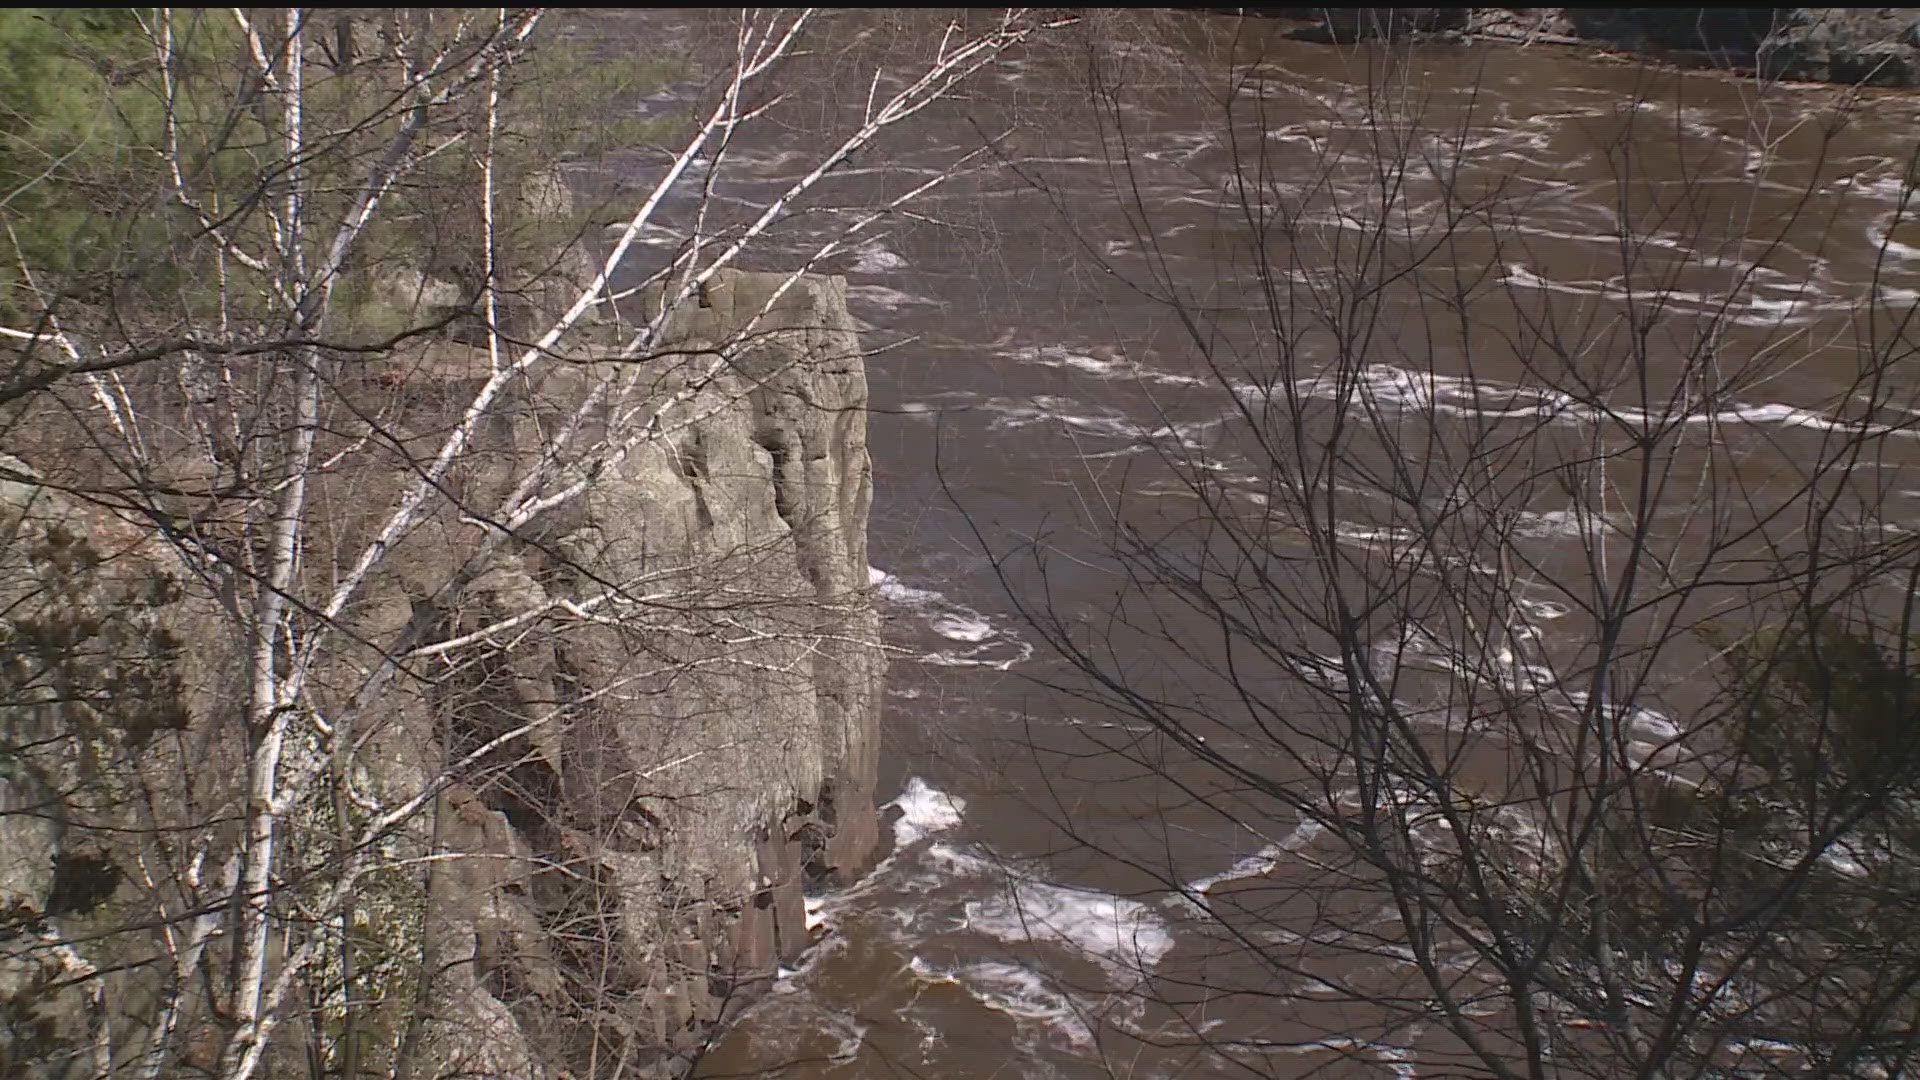 The teen slipped and fell from a ledge into the river at Interstate State Park in Taylors Falls Tuesday evening.